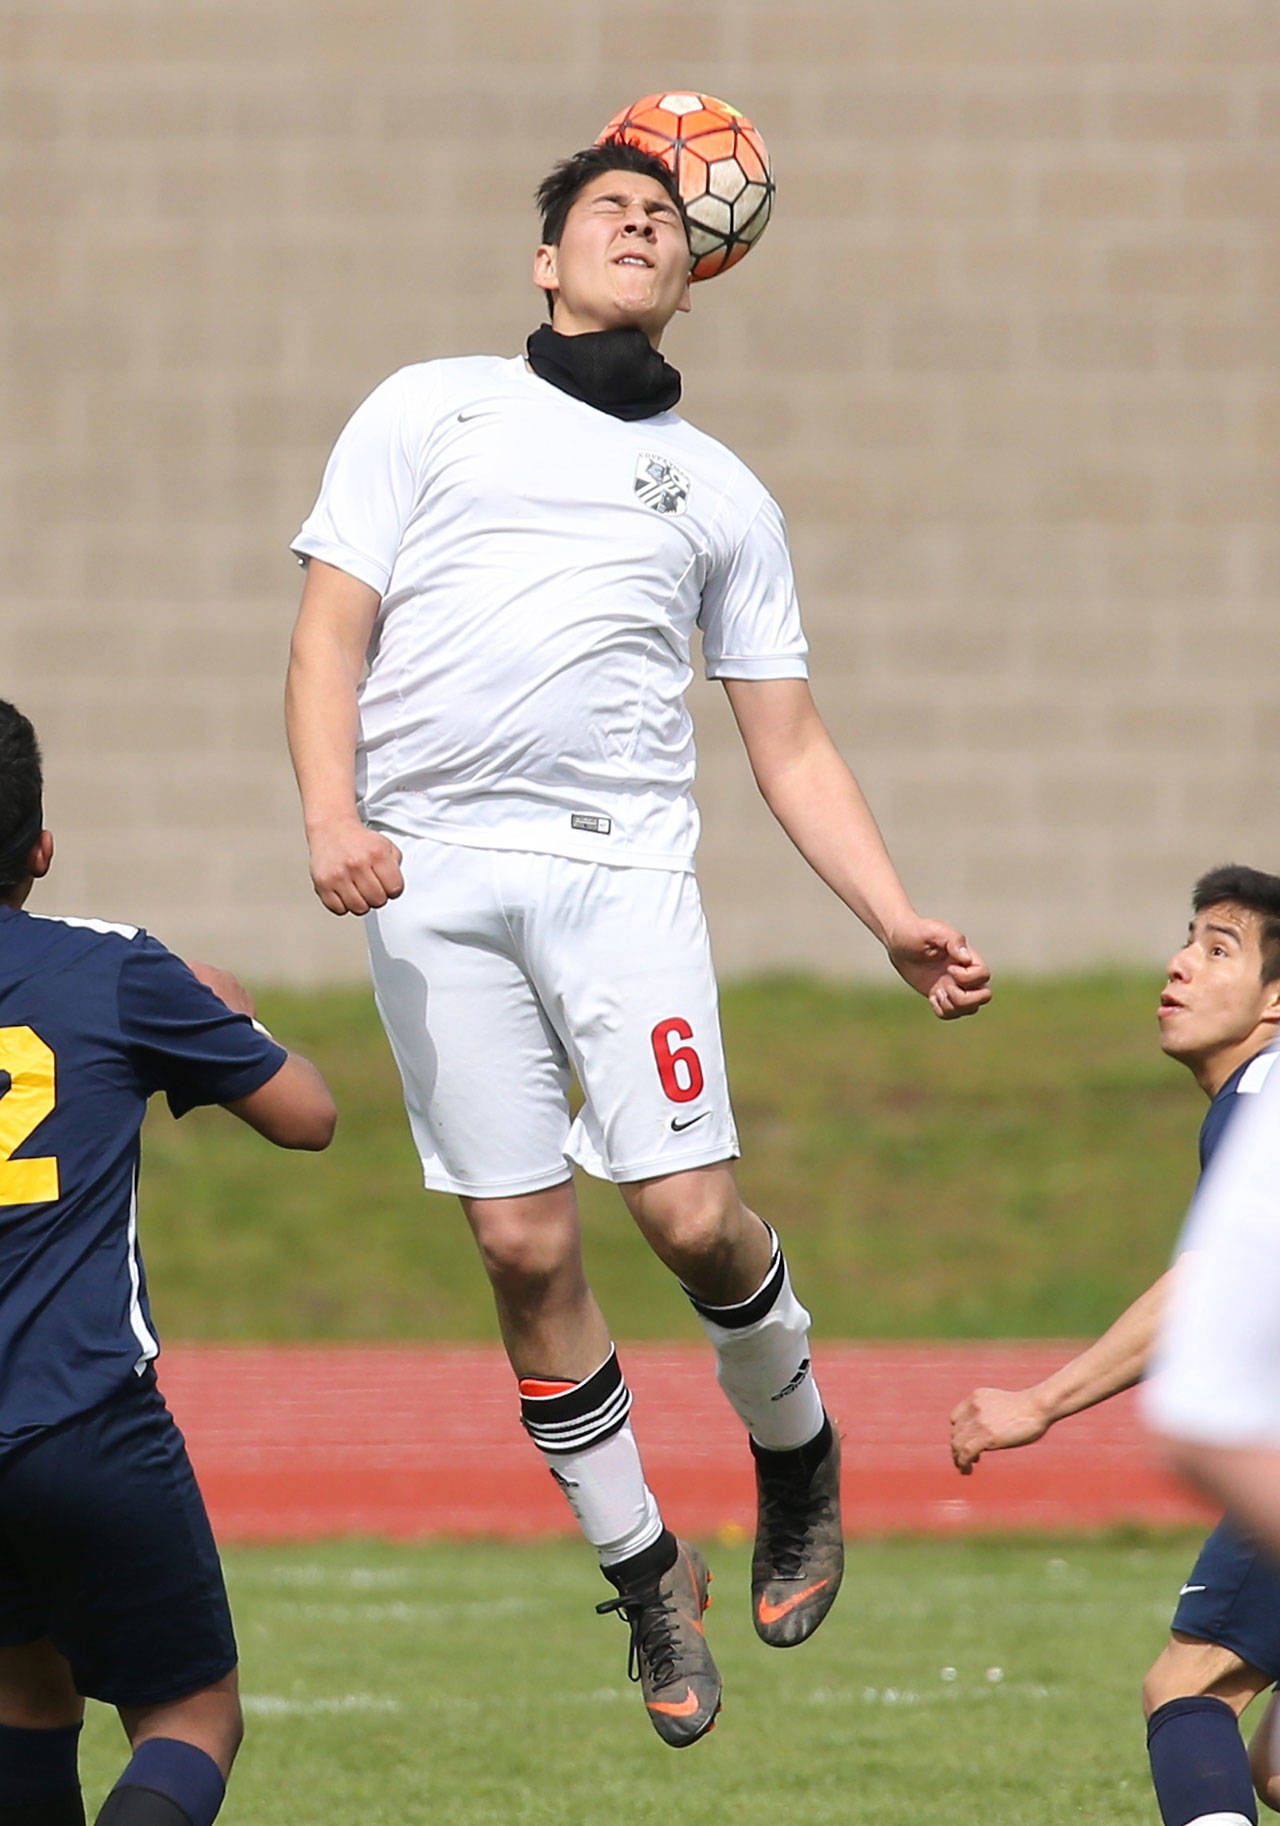 Coupeville’s Axel Partida uses his head in Saturday’s match. (Photo by John Fisken)